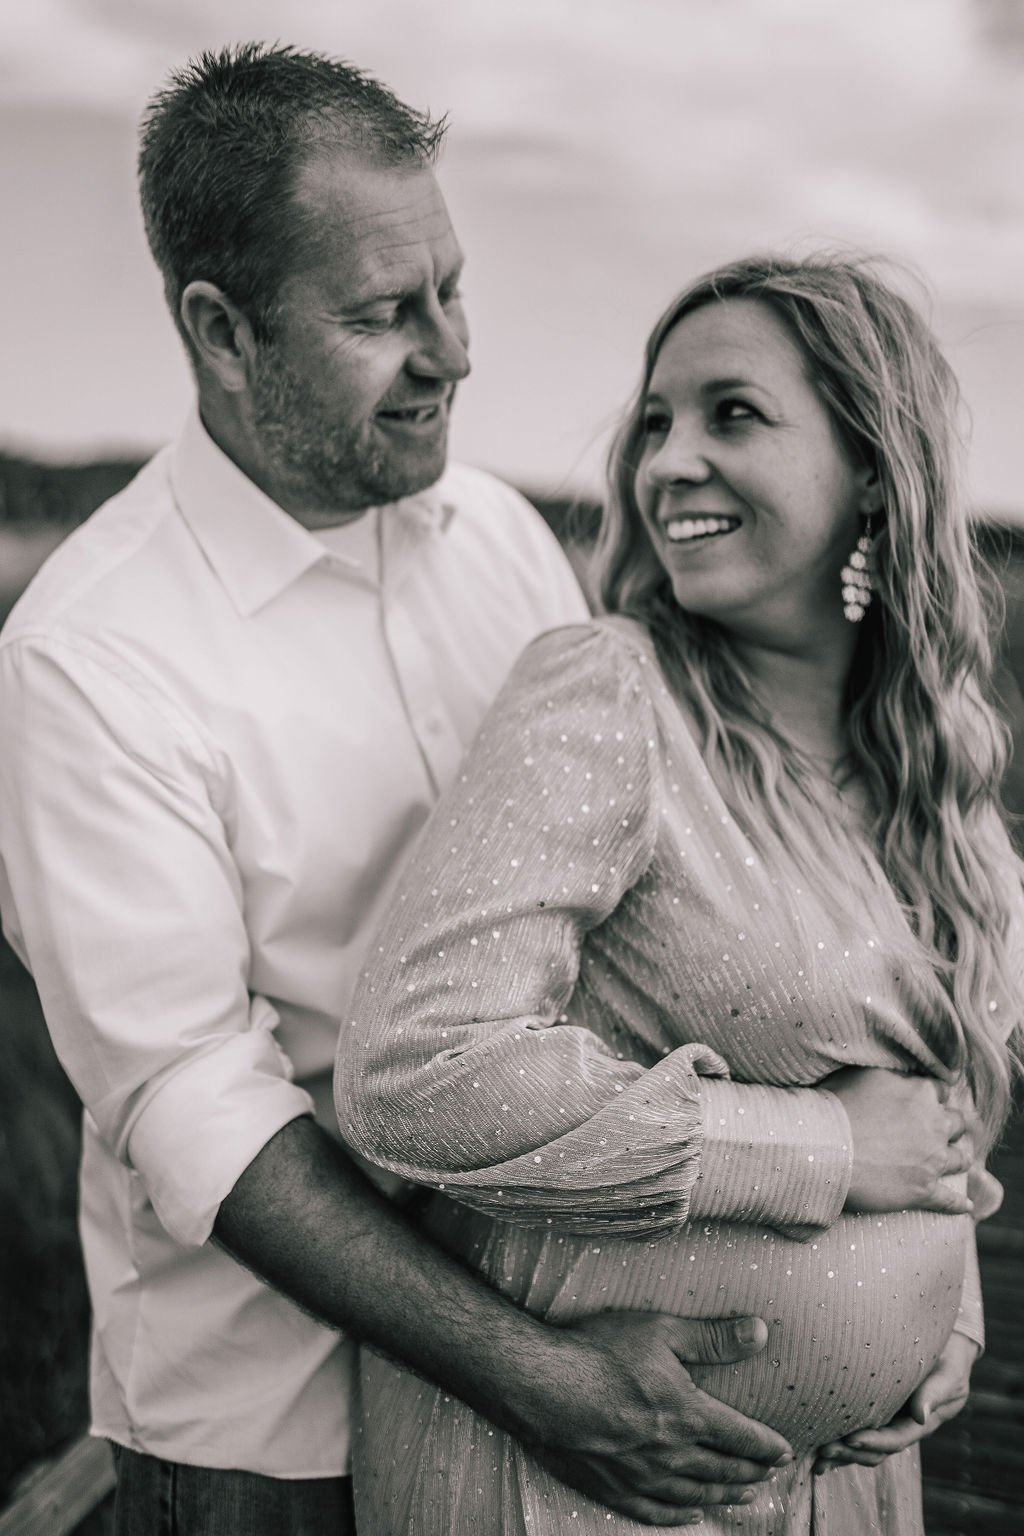 black and white photo of husband and wife embracing each other for thrit maternity session. man is holding the mothers baby bump as she looks back at him smiling.